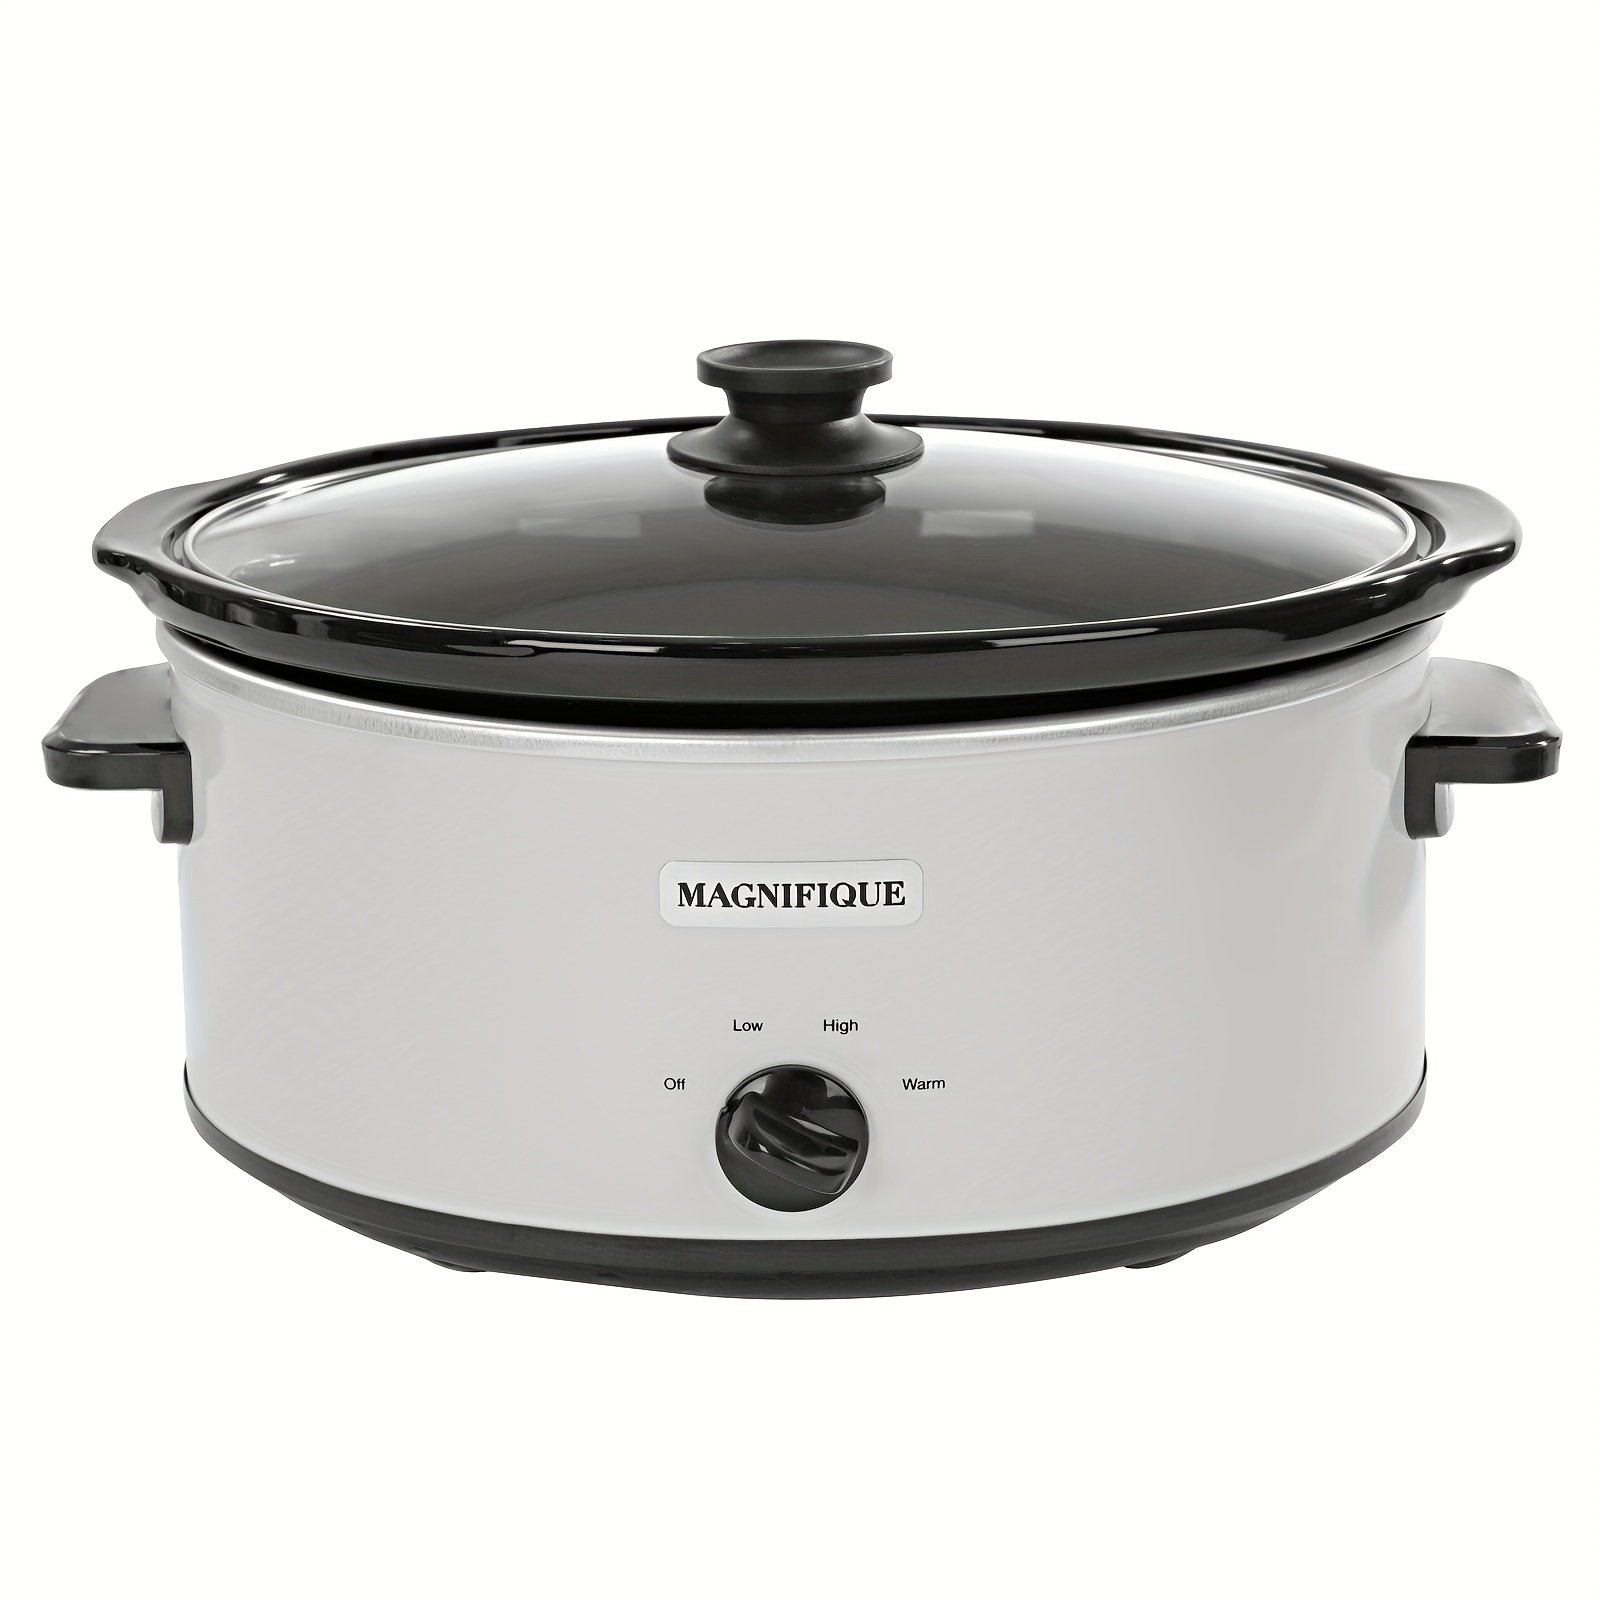 

Magnifique 1pc, 7 Quart Slow Cooker Oval Manual Pot Food Warmer With 3 Cooking Settings, White Stainless Steel